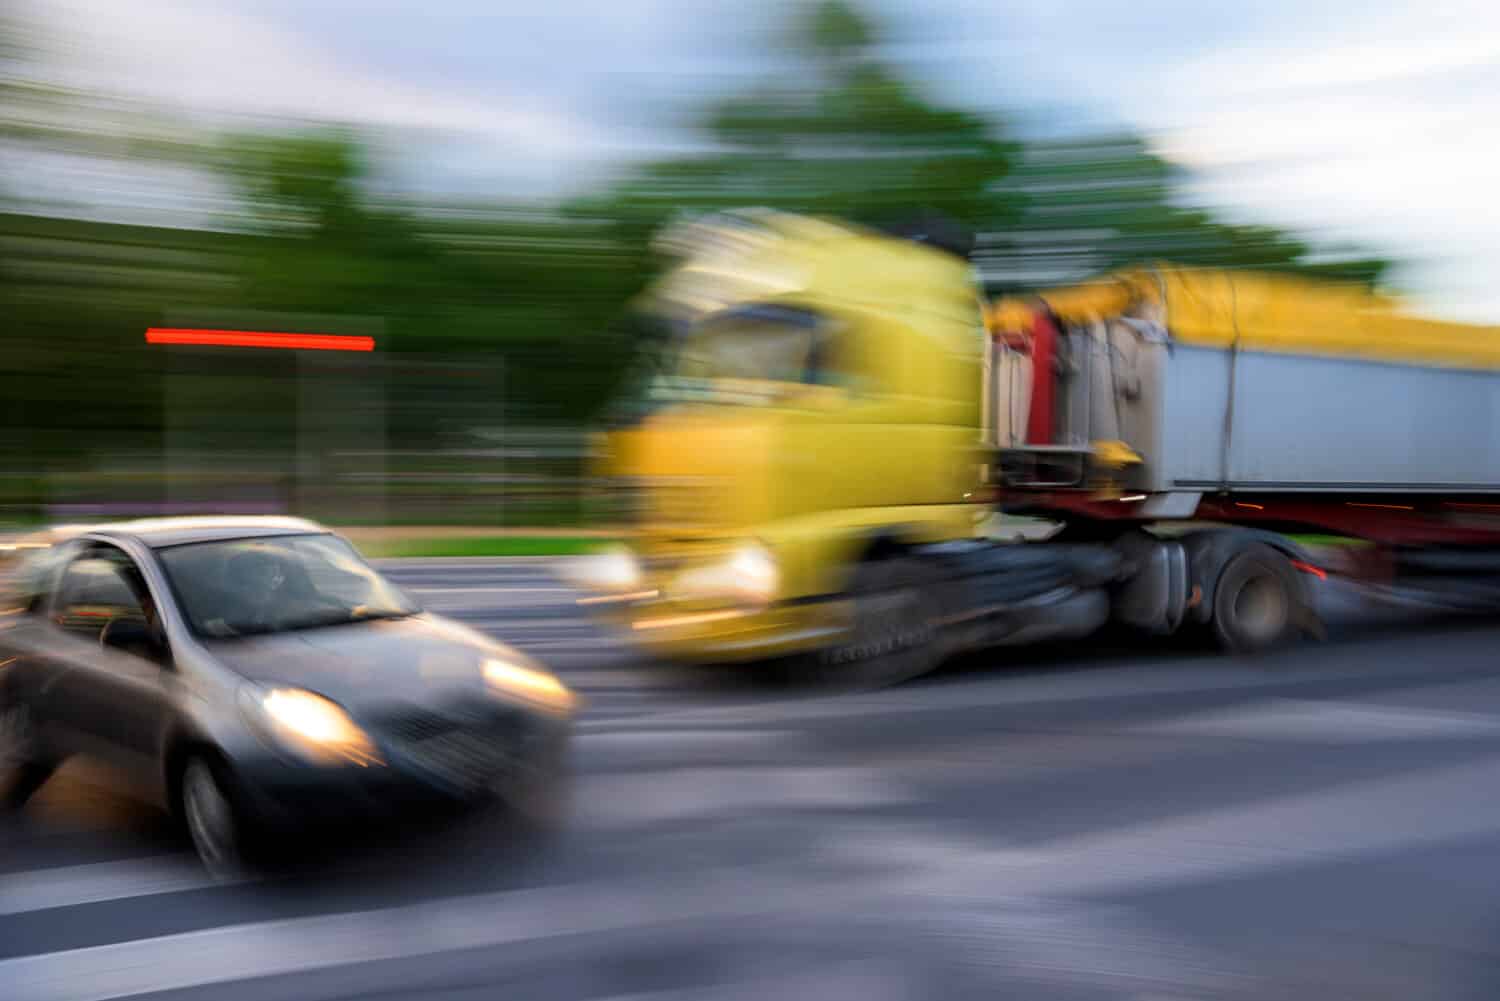 Dangerous city traffic situation between a car and a truck in motion blur. Defocused image